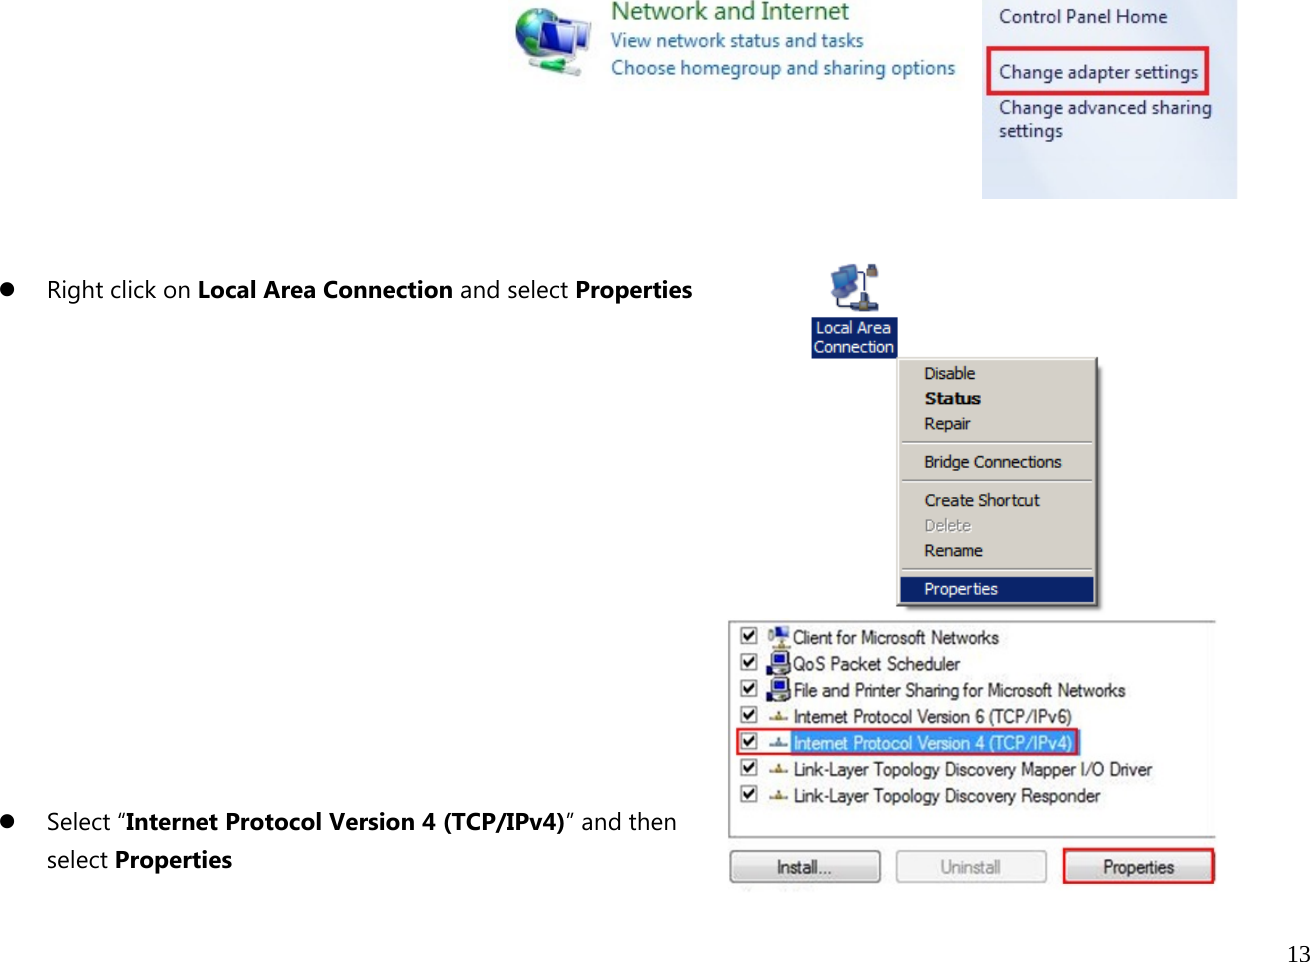  13           z Right click on Local Area Connection and select Properties             z Select “Internet Protocol Version 4 (TCP/IPv4)” and then  select Properties 